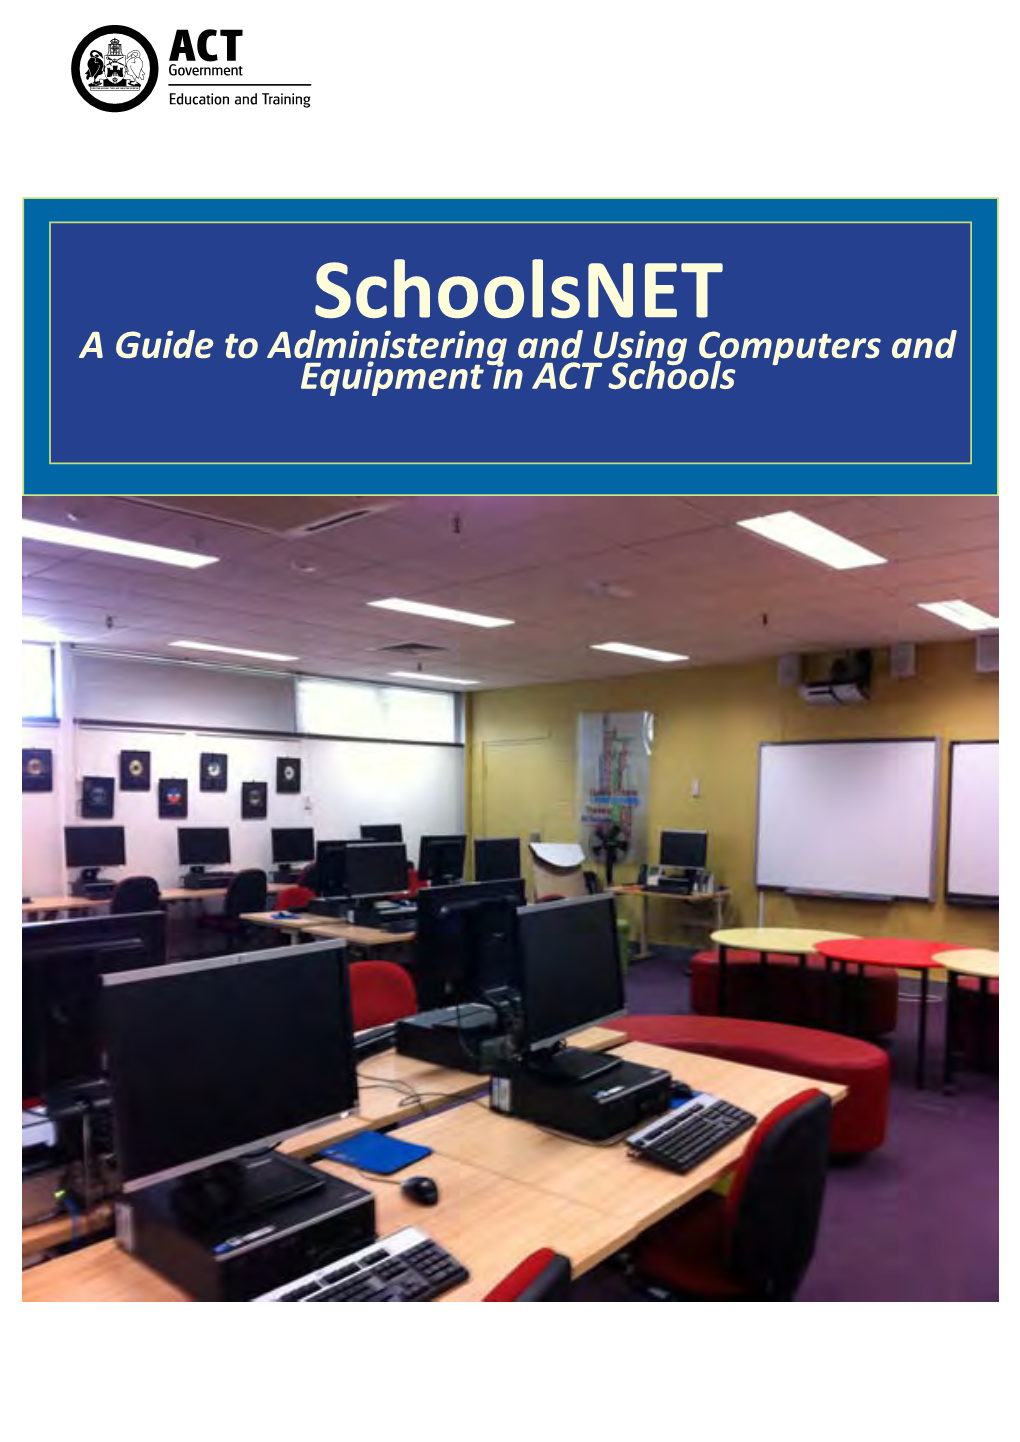 A Guide to Administering and Using Computers and Equipment in ACT Schools 1